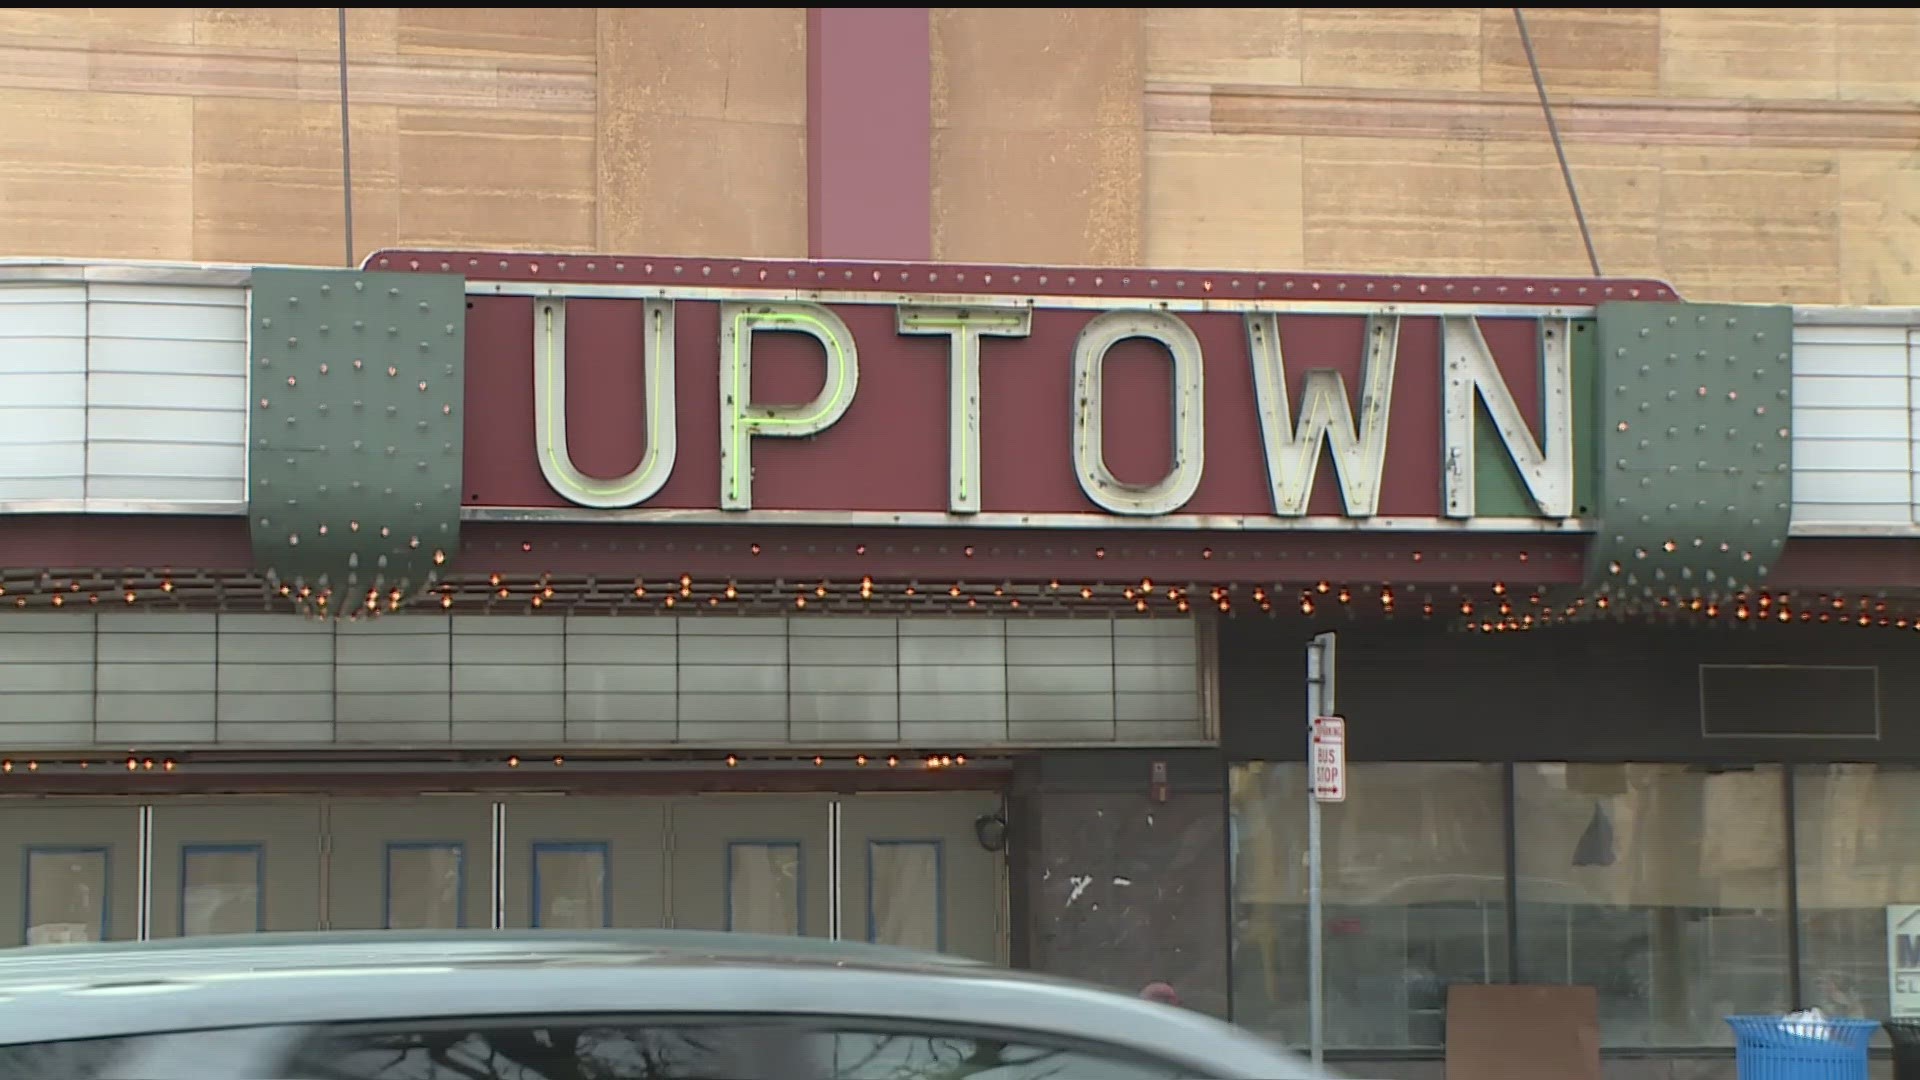 The return of the historic Uptown Theater makes way for a new era, in a neighborhood that's seen its share of setbacks in recent years.